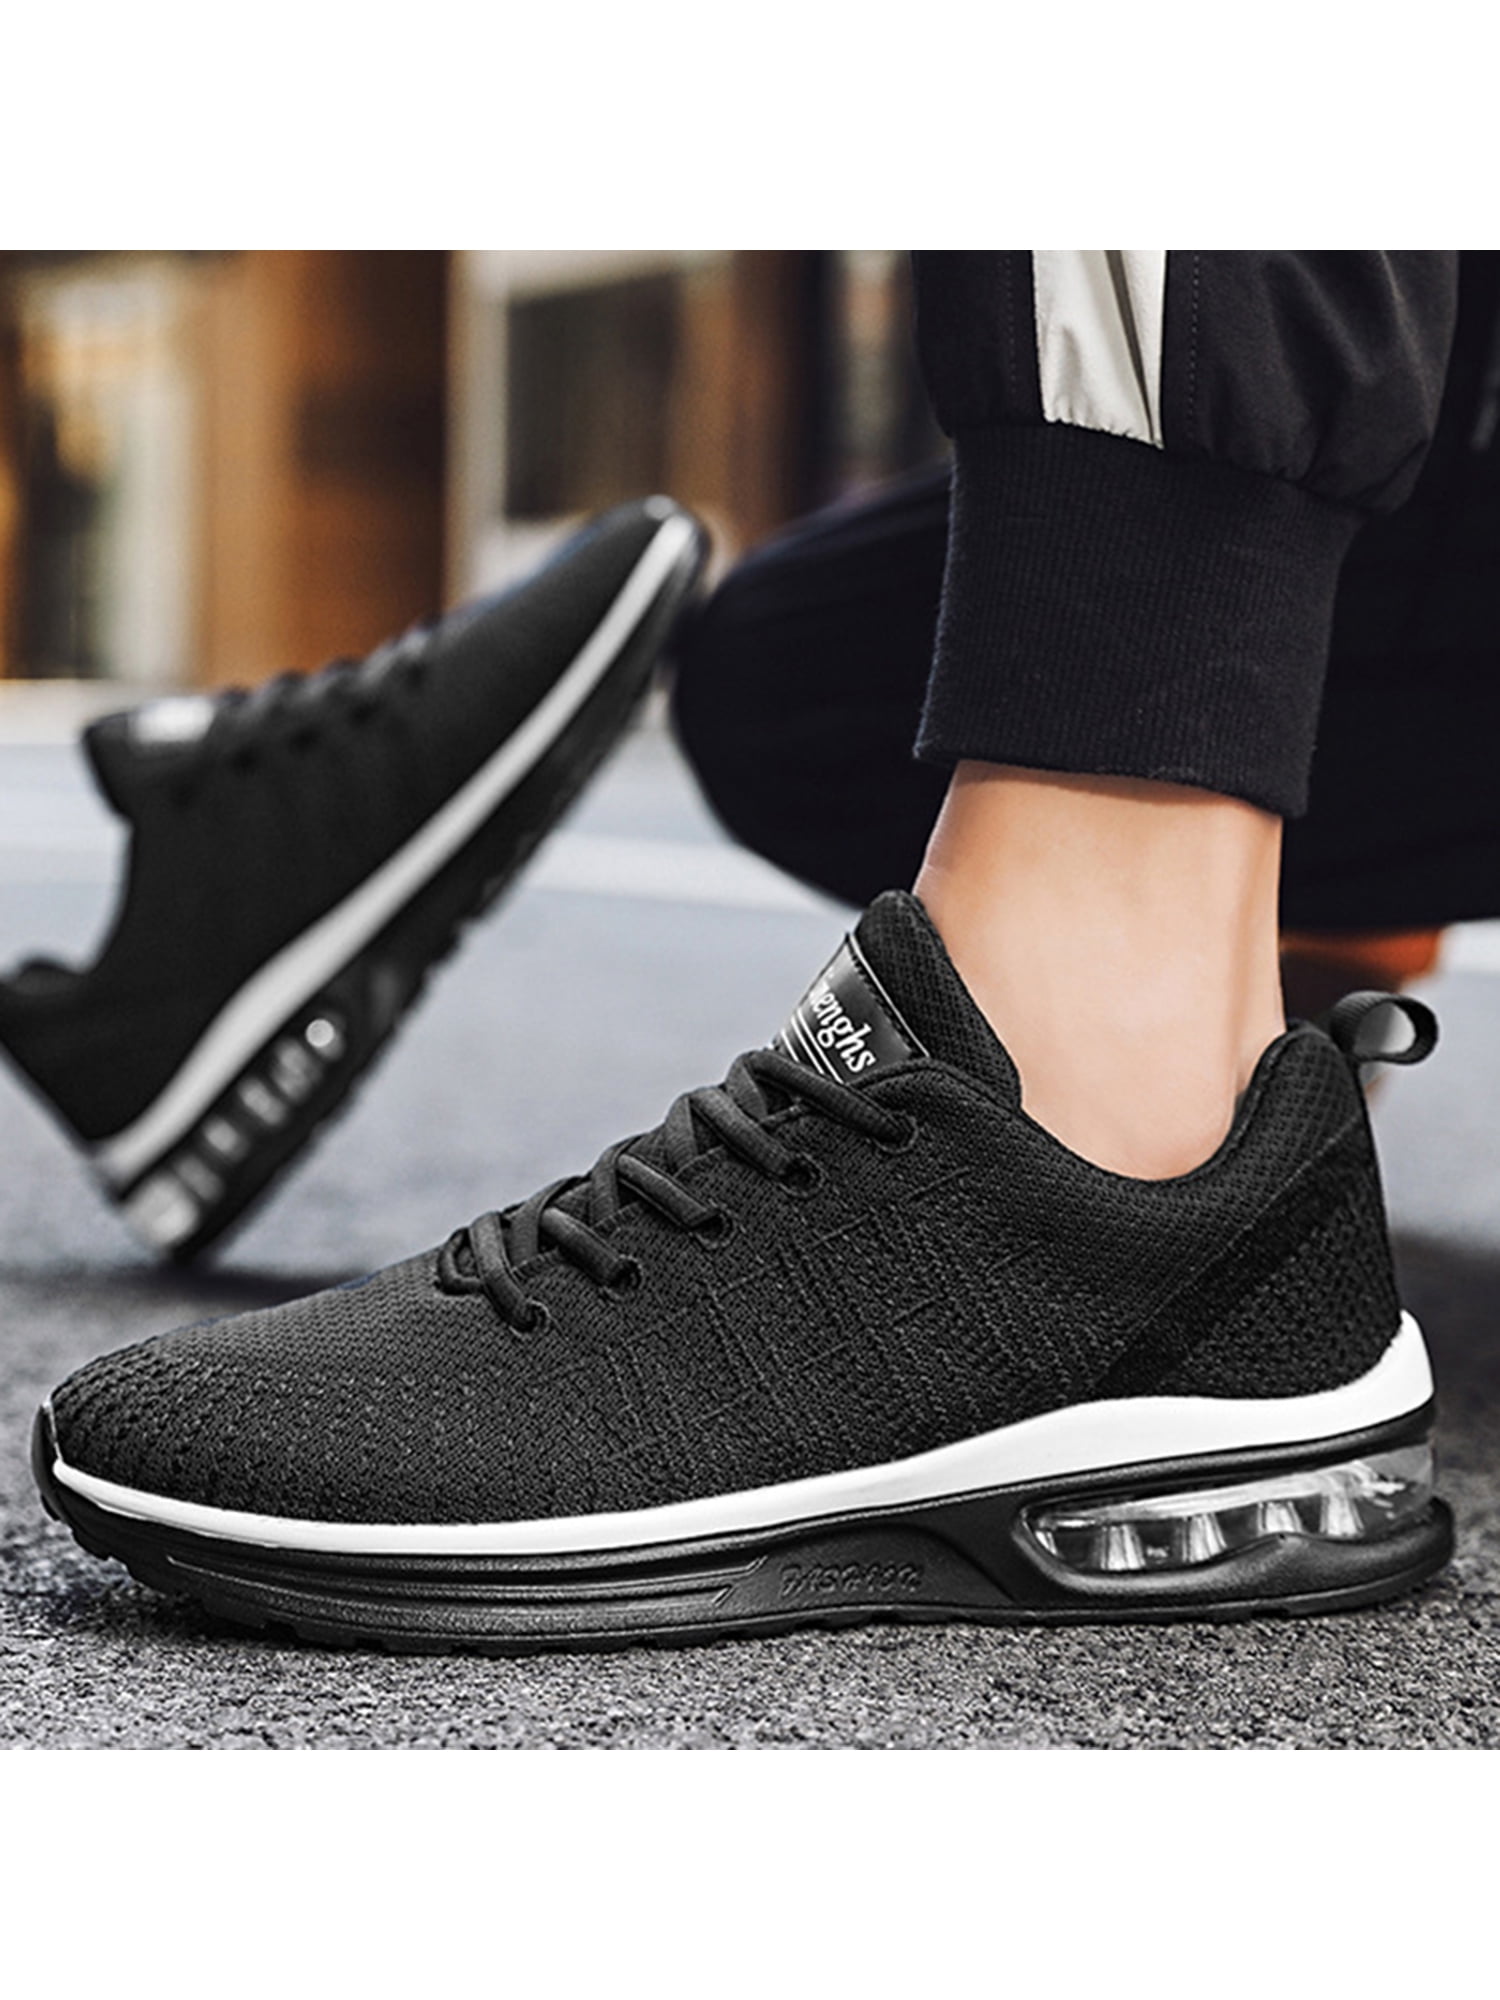 Men's Air Cushion Casual Sports Running Shoes Athletic Walking Sneakers Big Size